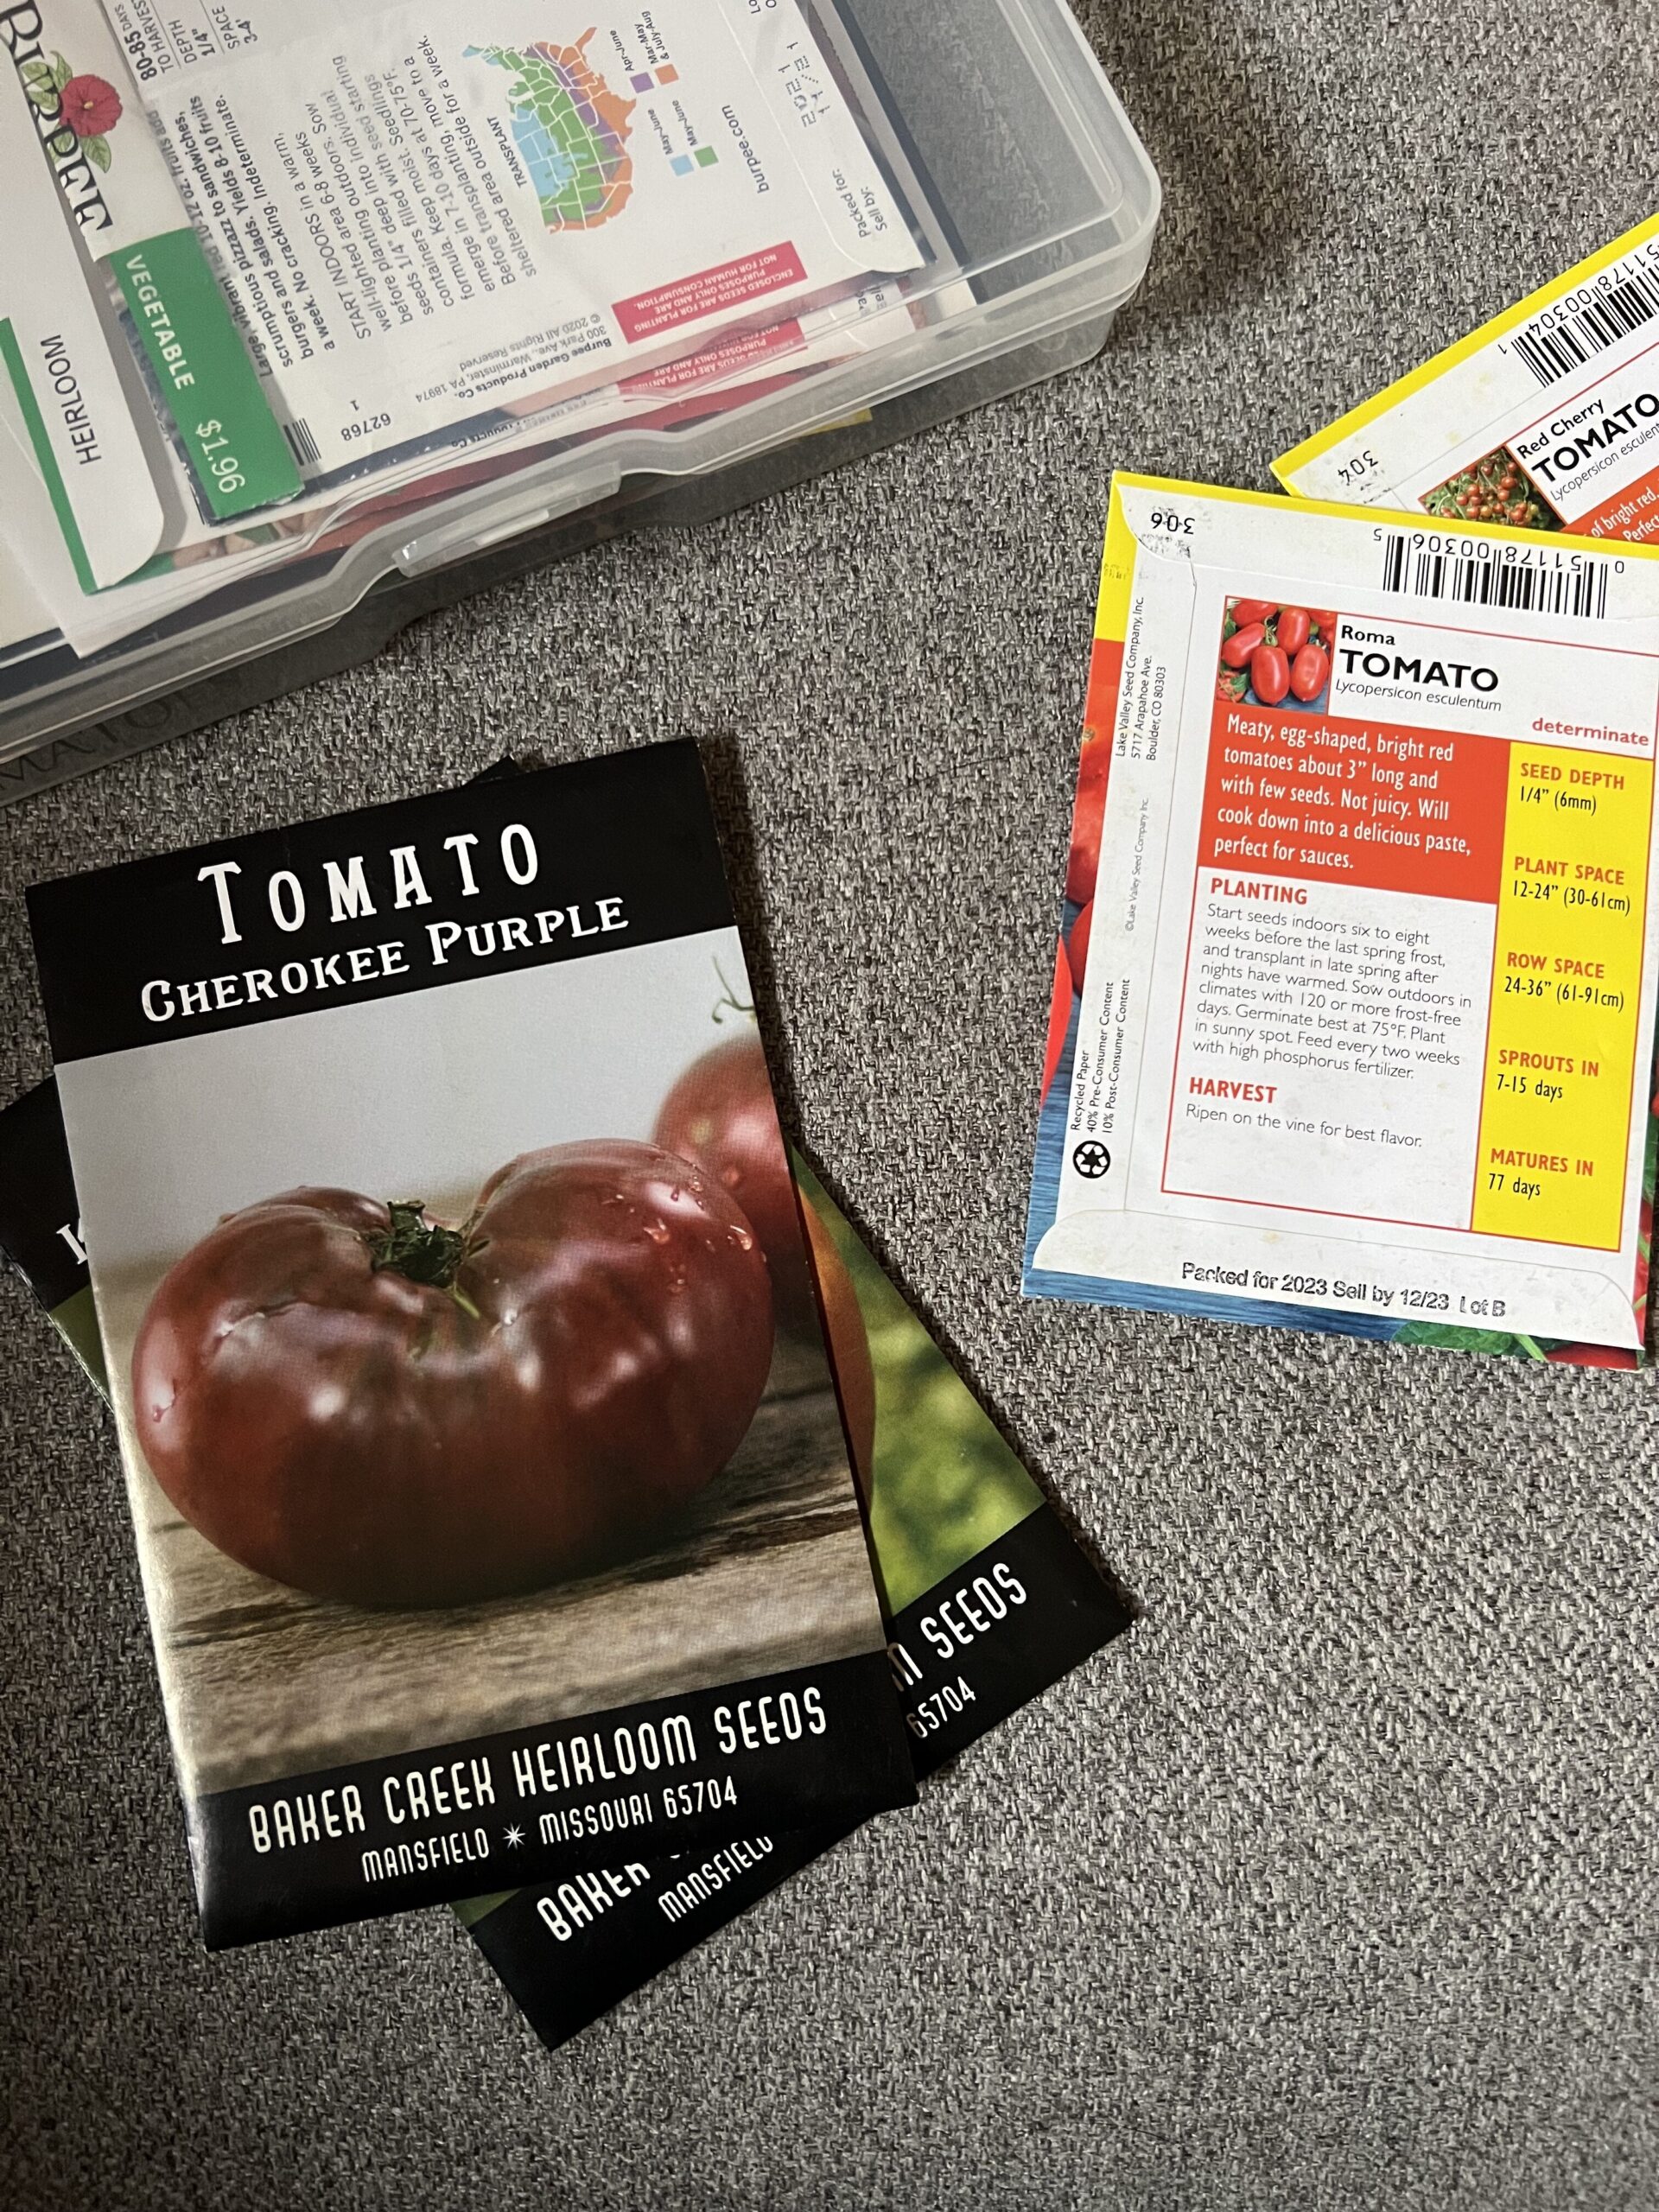 tomato seed packets next to case to store seeds